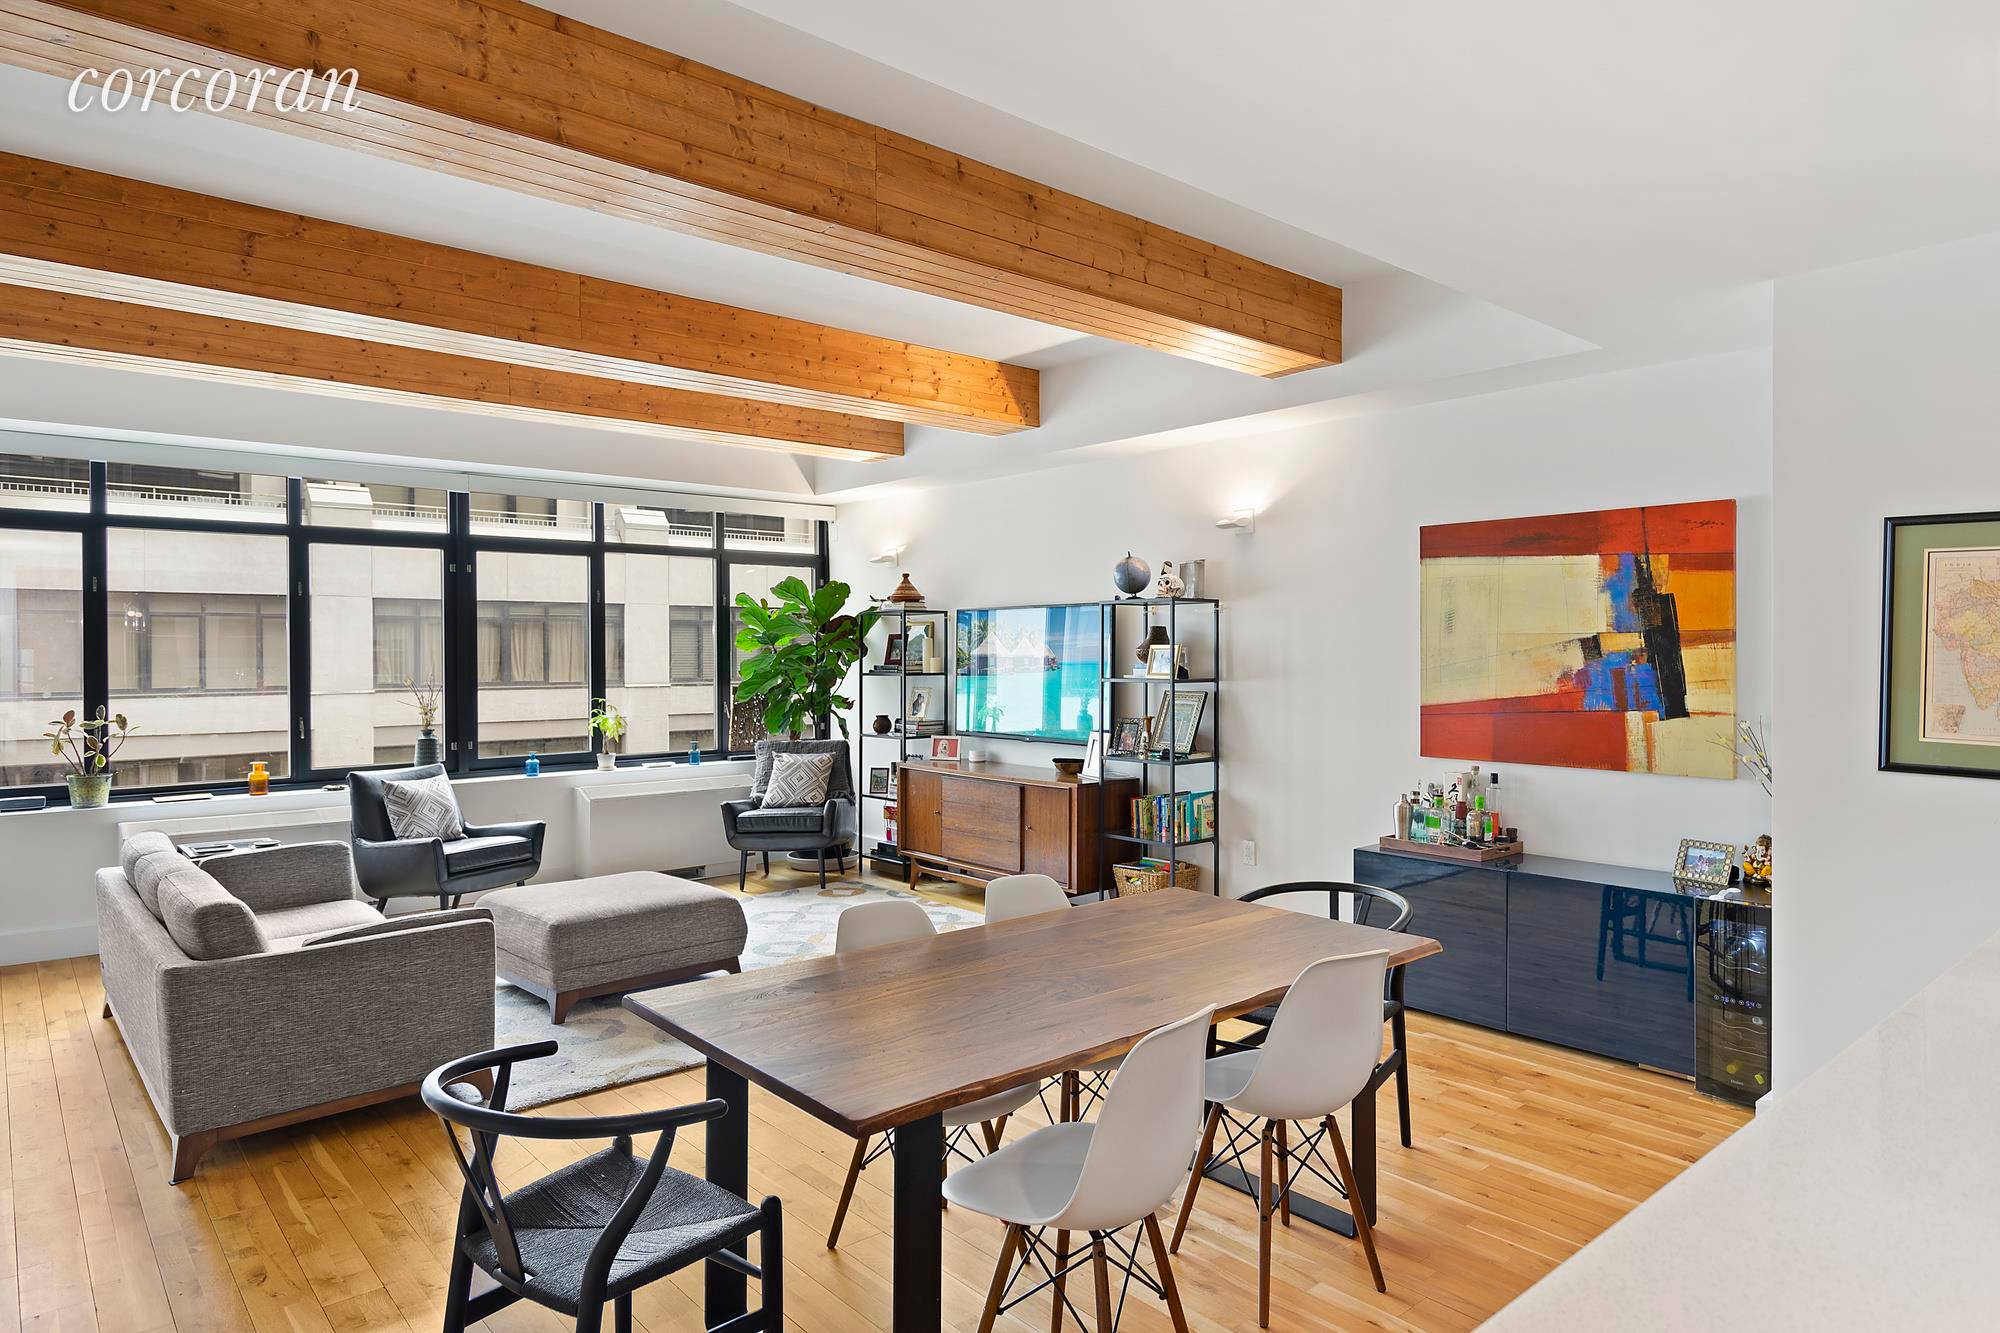 A STUNNING SEALPositioned in one of Brooklyns most iconic residential communities, this smart and stylish loft apartment offers a rare opportunity to live in the acclaimed One Brooklyn Bridge Park.